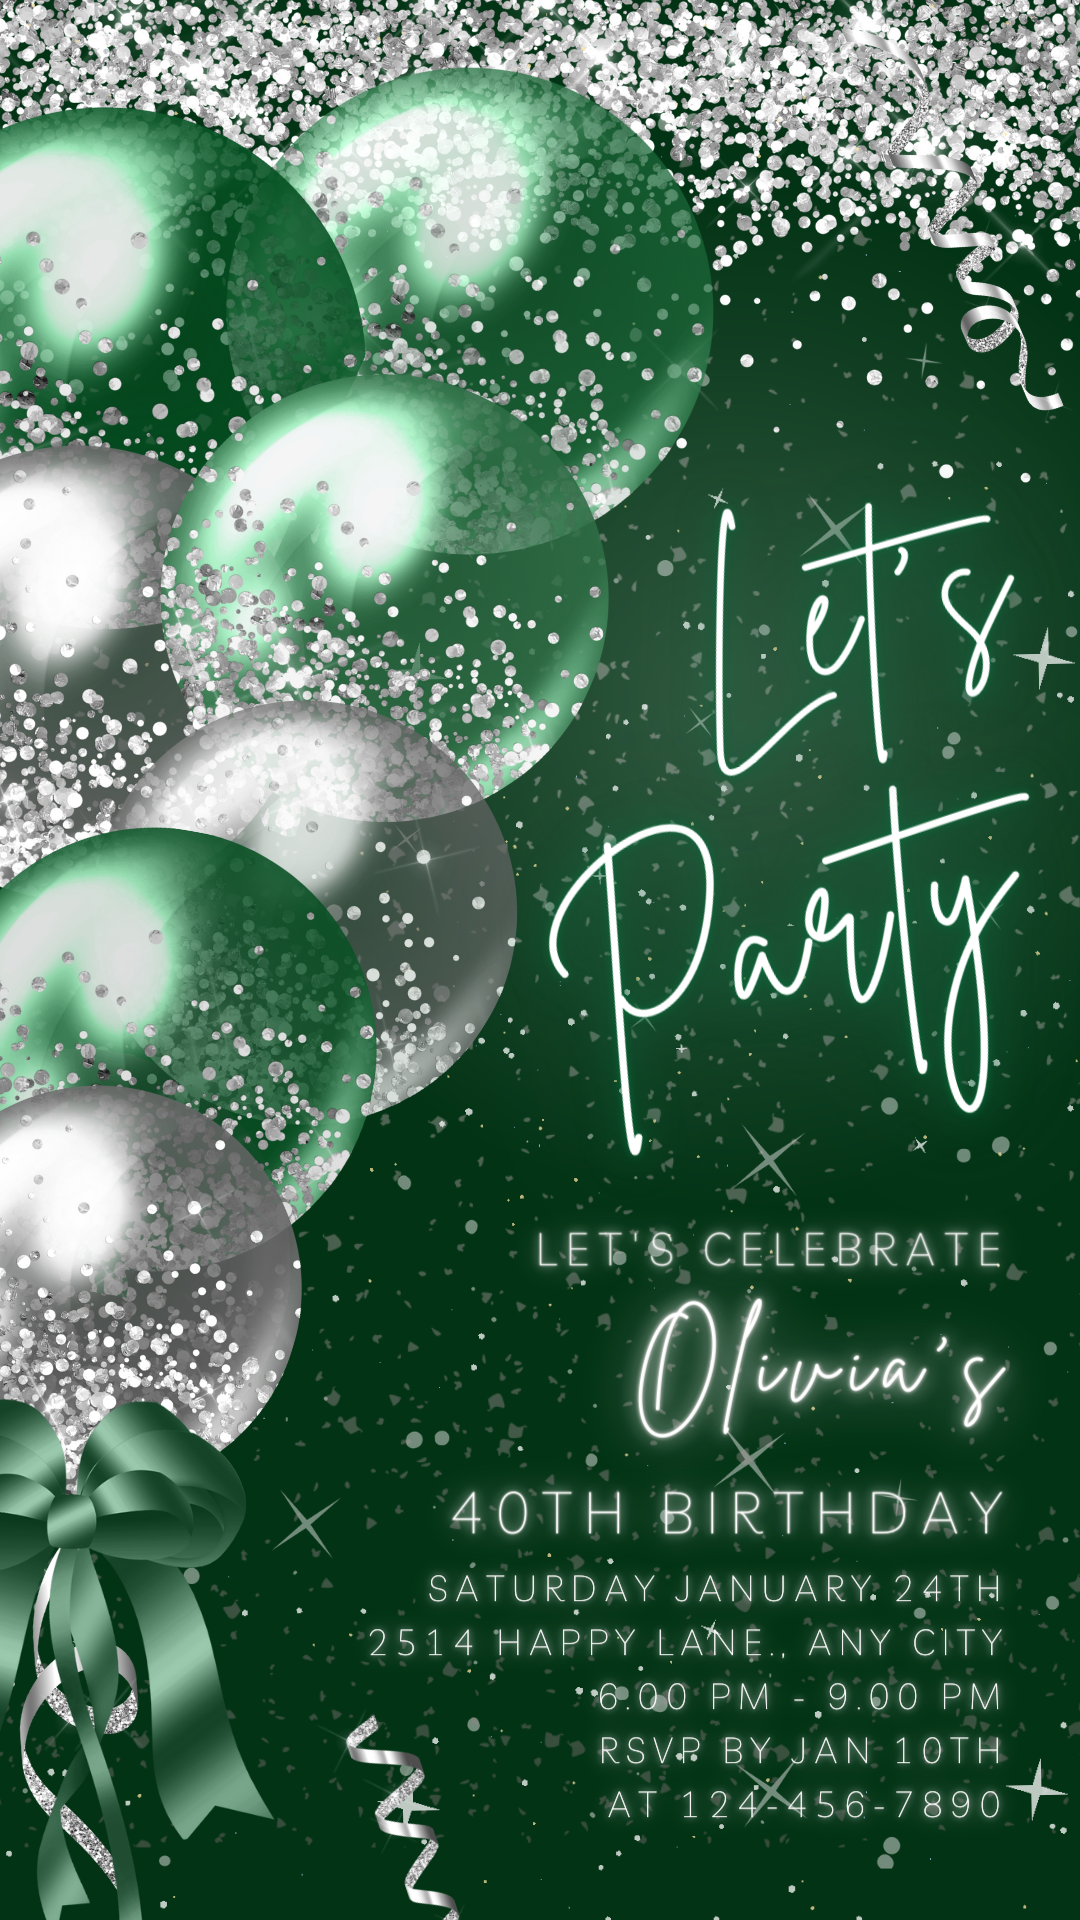 Animated Let's Party Invite for any Event Celebration, Editable Video Template, Birthday invitation for any Age | Green & Silver E-vite